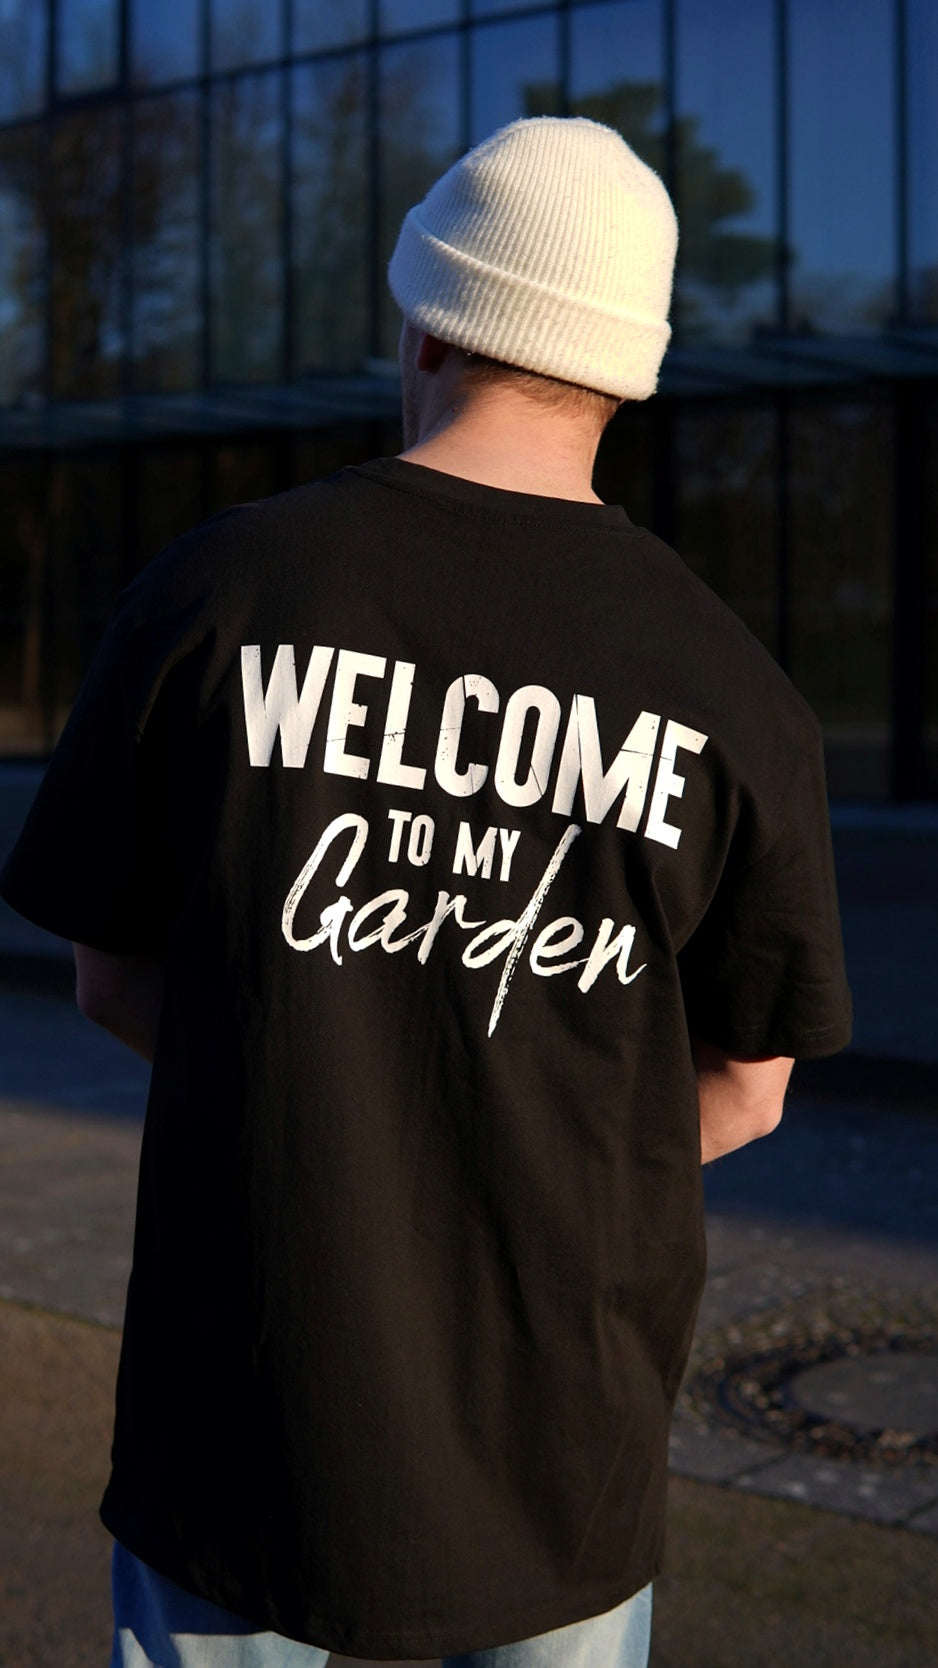 WTMG T-Shirt - "From Garden With Love" - Oversized